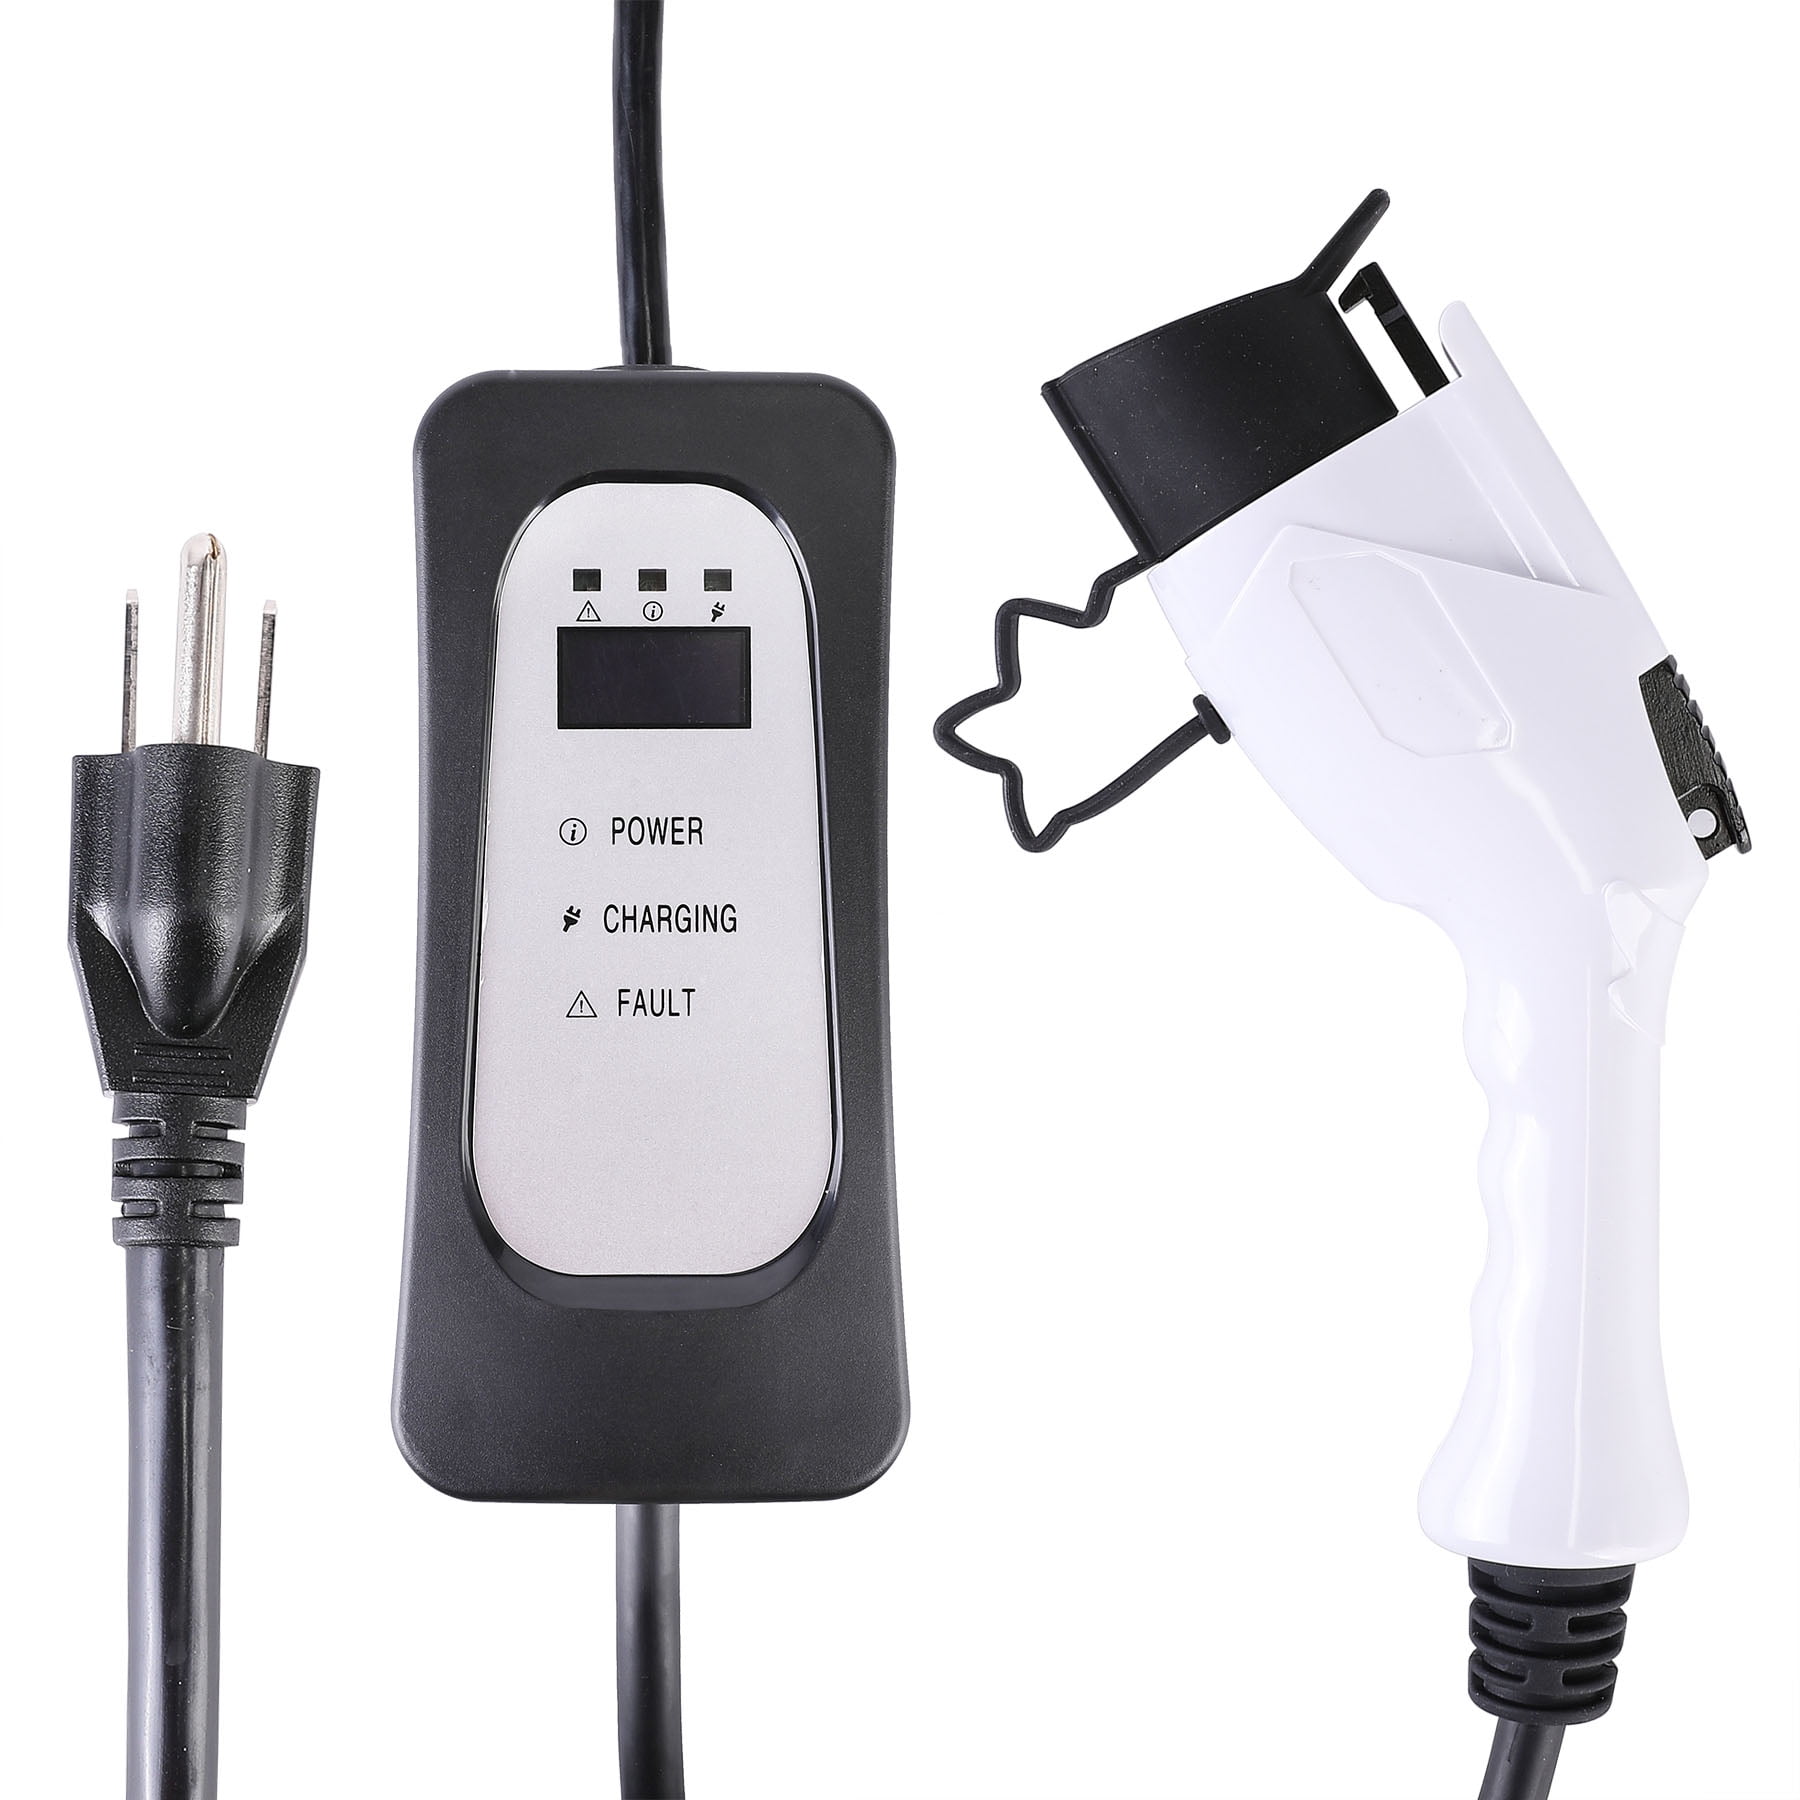 Level 1 Electric Car EV Charger (110V-240V 16A), IP54 Waterproof Rating,  16' Cord and Heavy Duty Electric Cable Plug Adapter, SAE J1772-EVSE UL  Recognized 